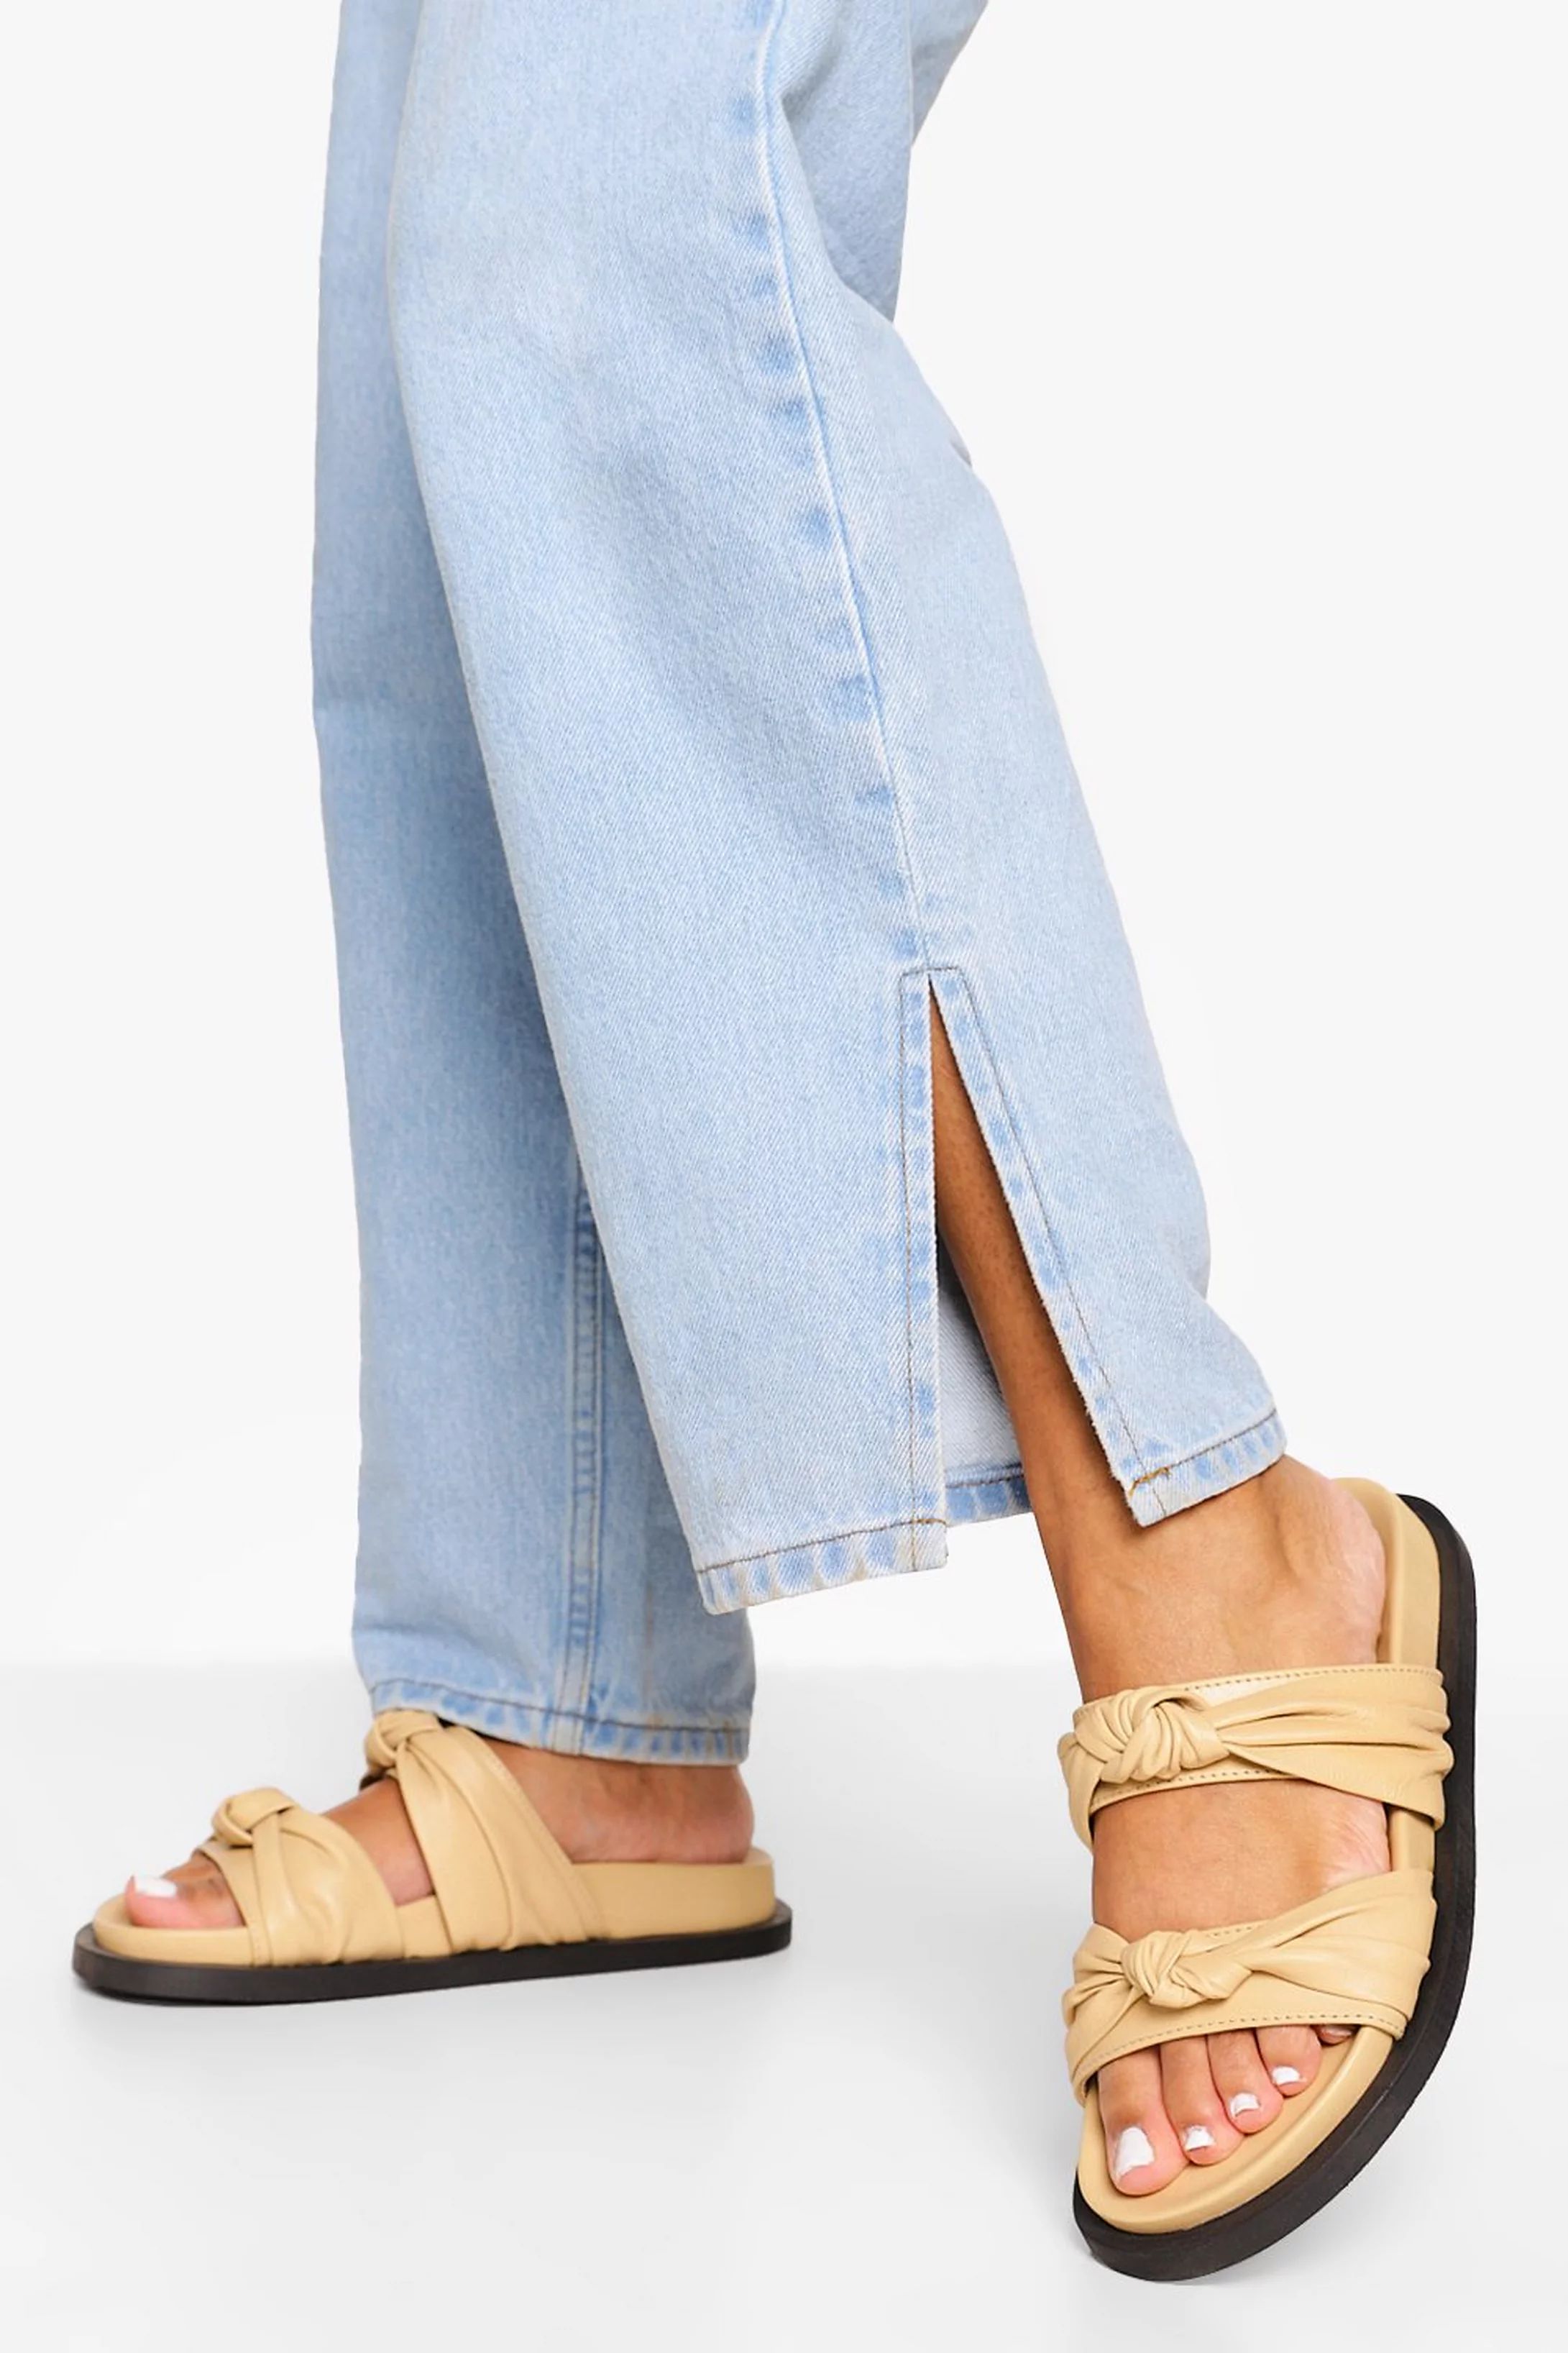 Leather Knot Detail Double Strap Footbed Slid | Boohoo.com (US & CA)